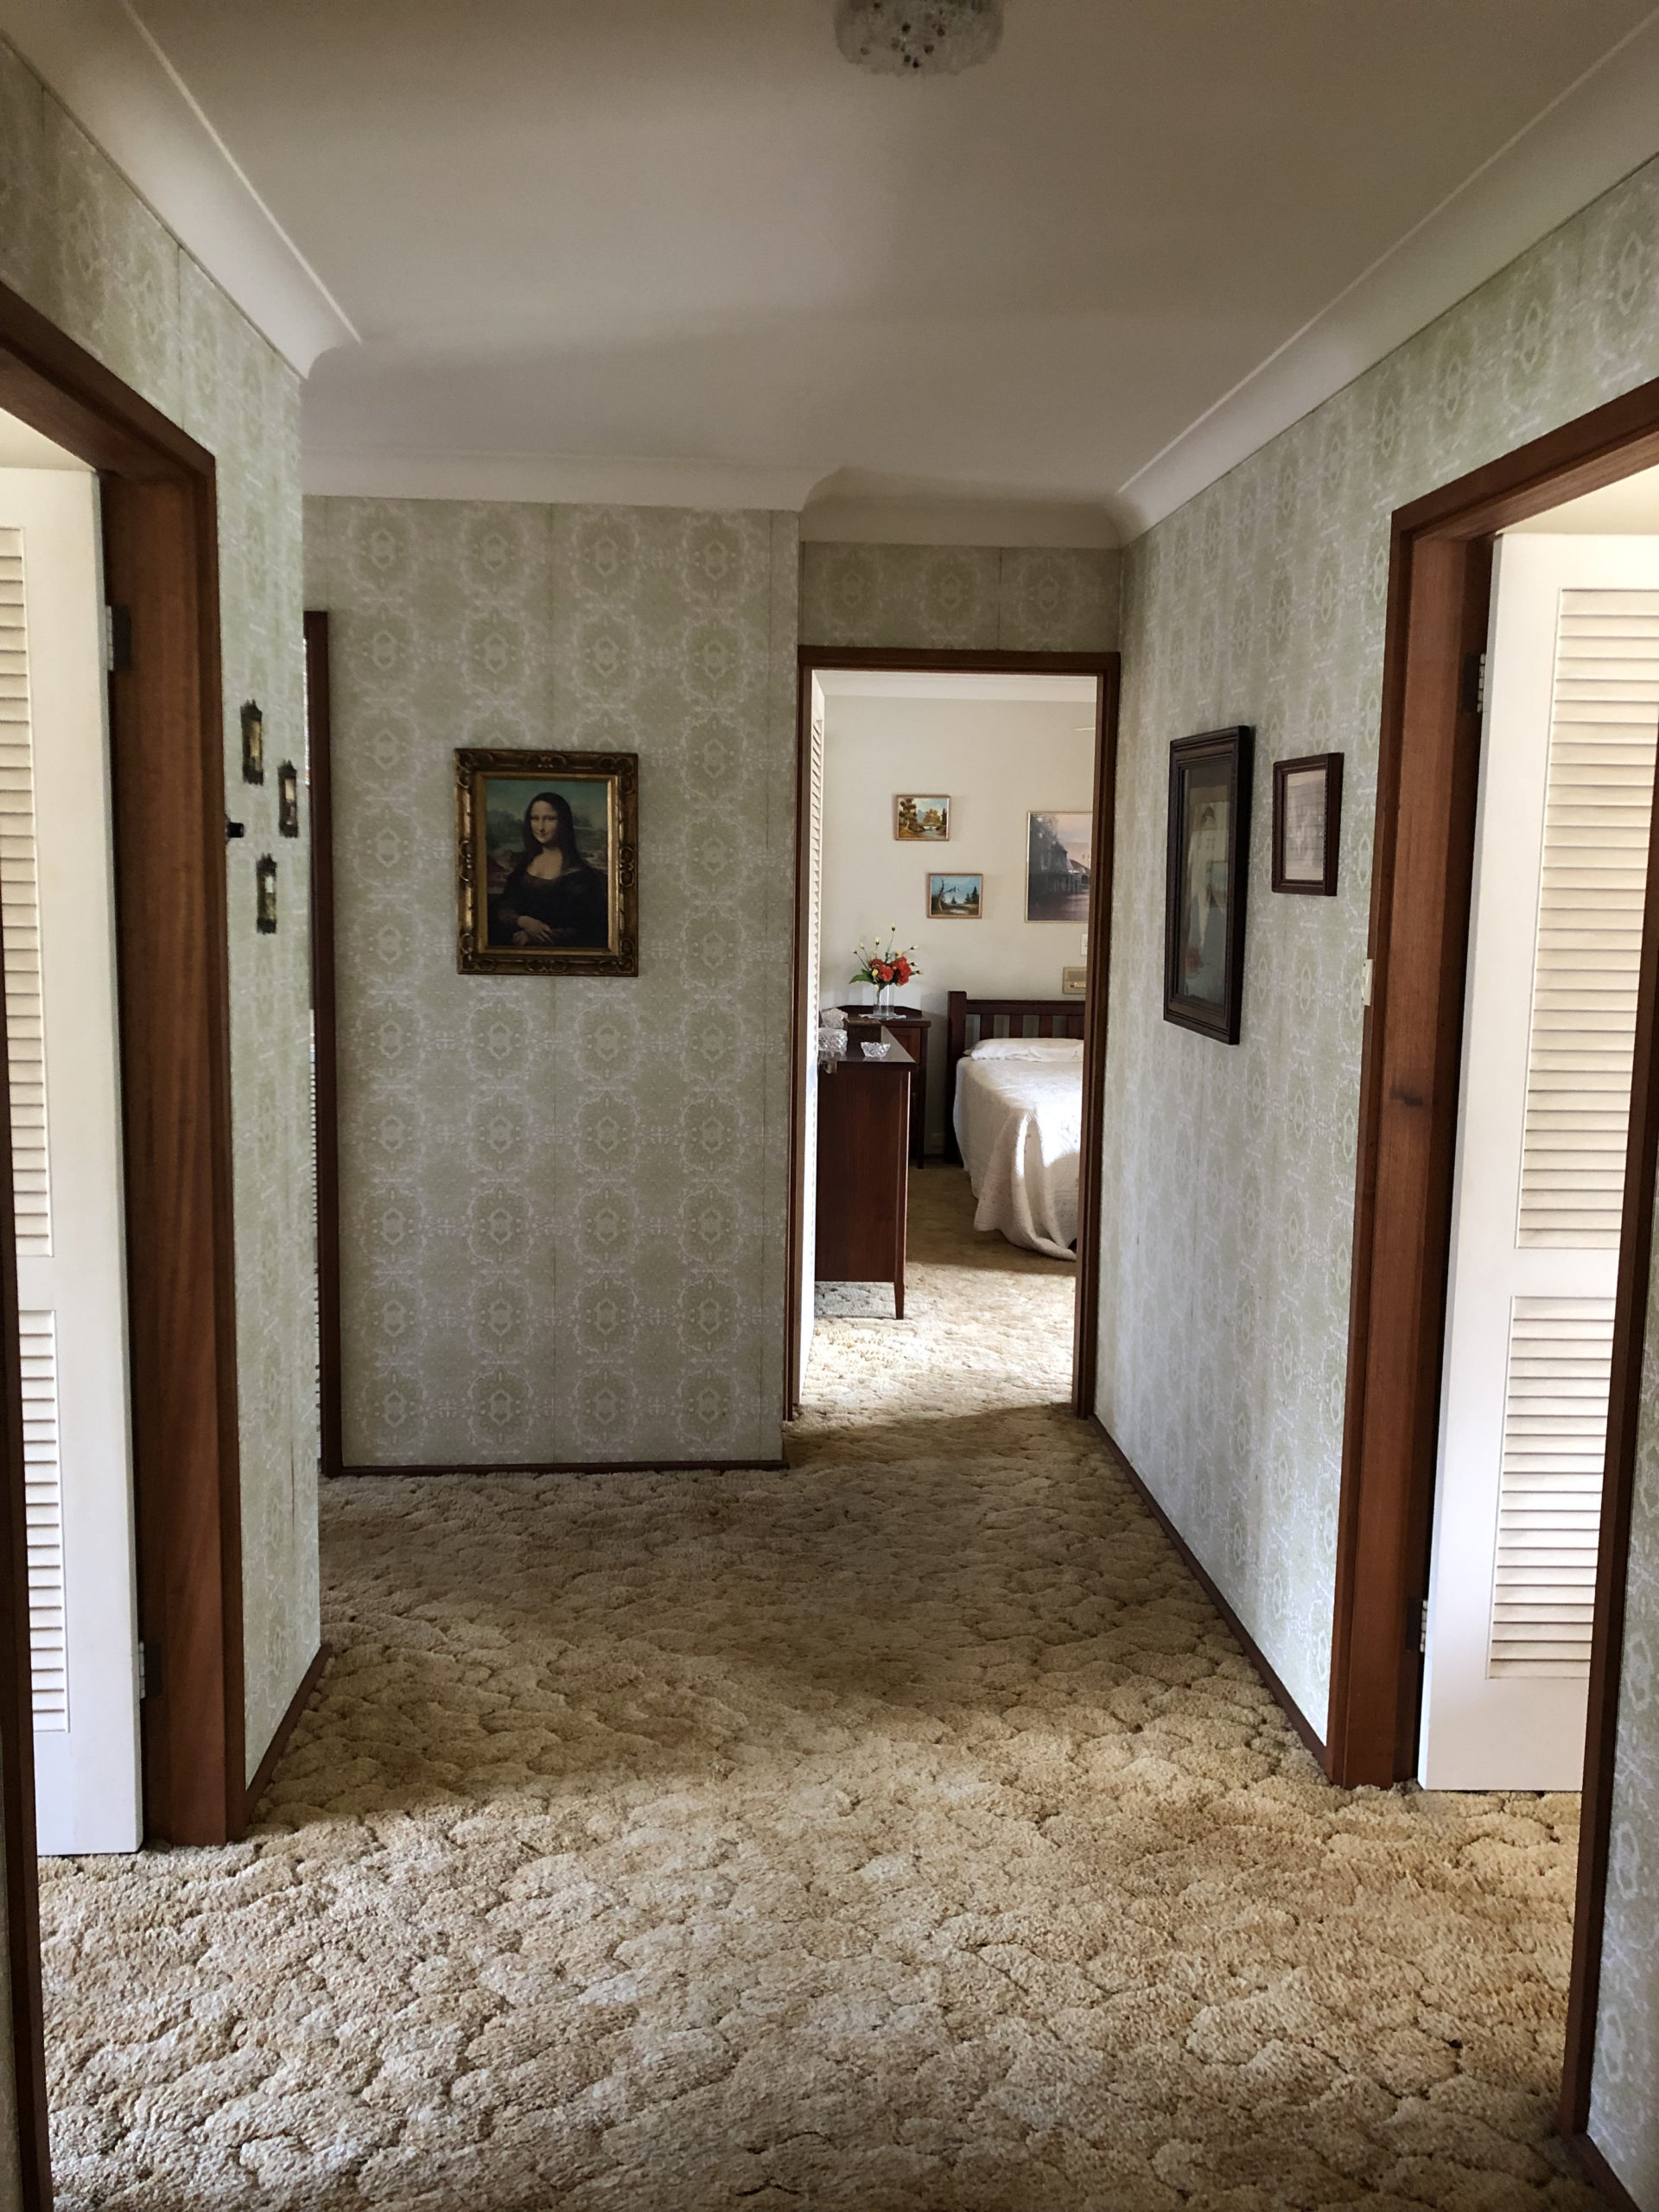 hallway with beige textured carpet and a print of the Mona Lisa